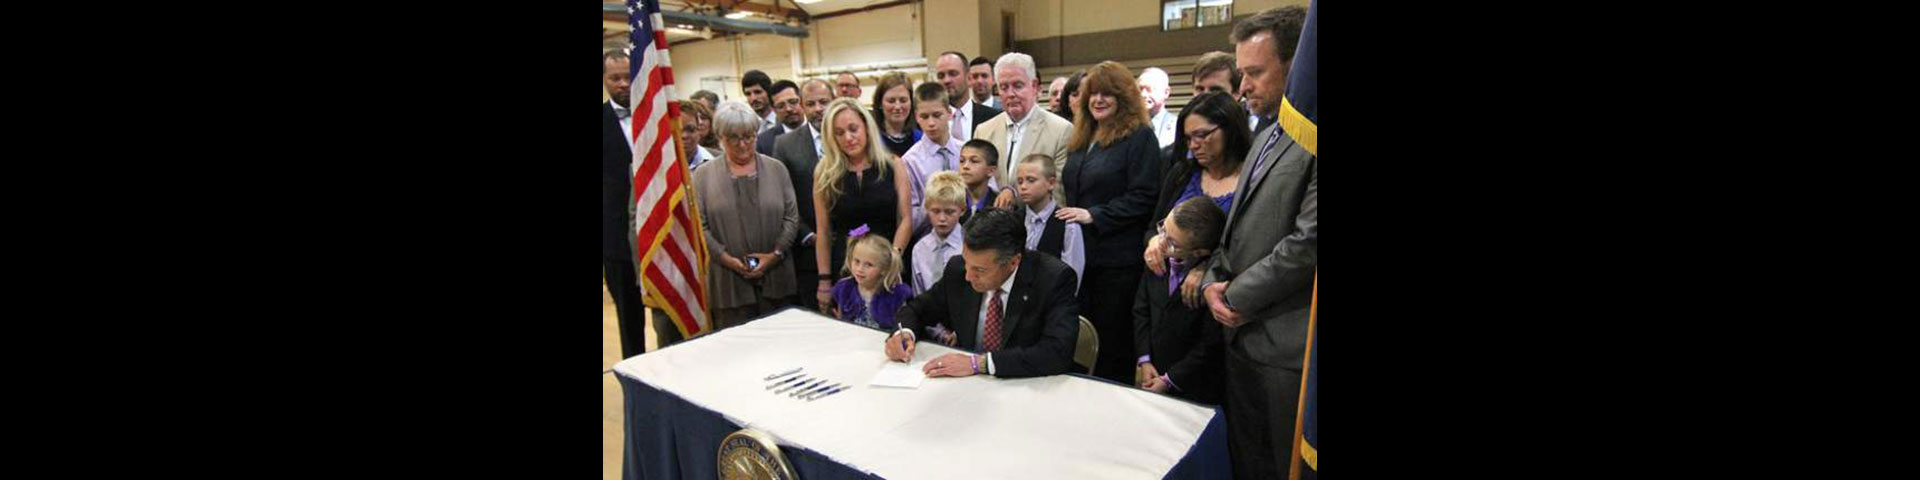 Nevada State Anti-bullying Law Signing